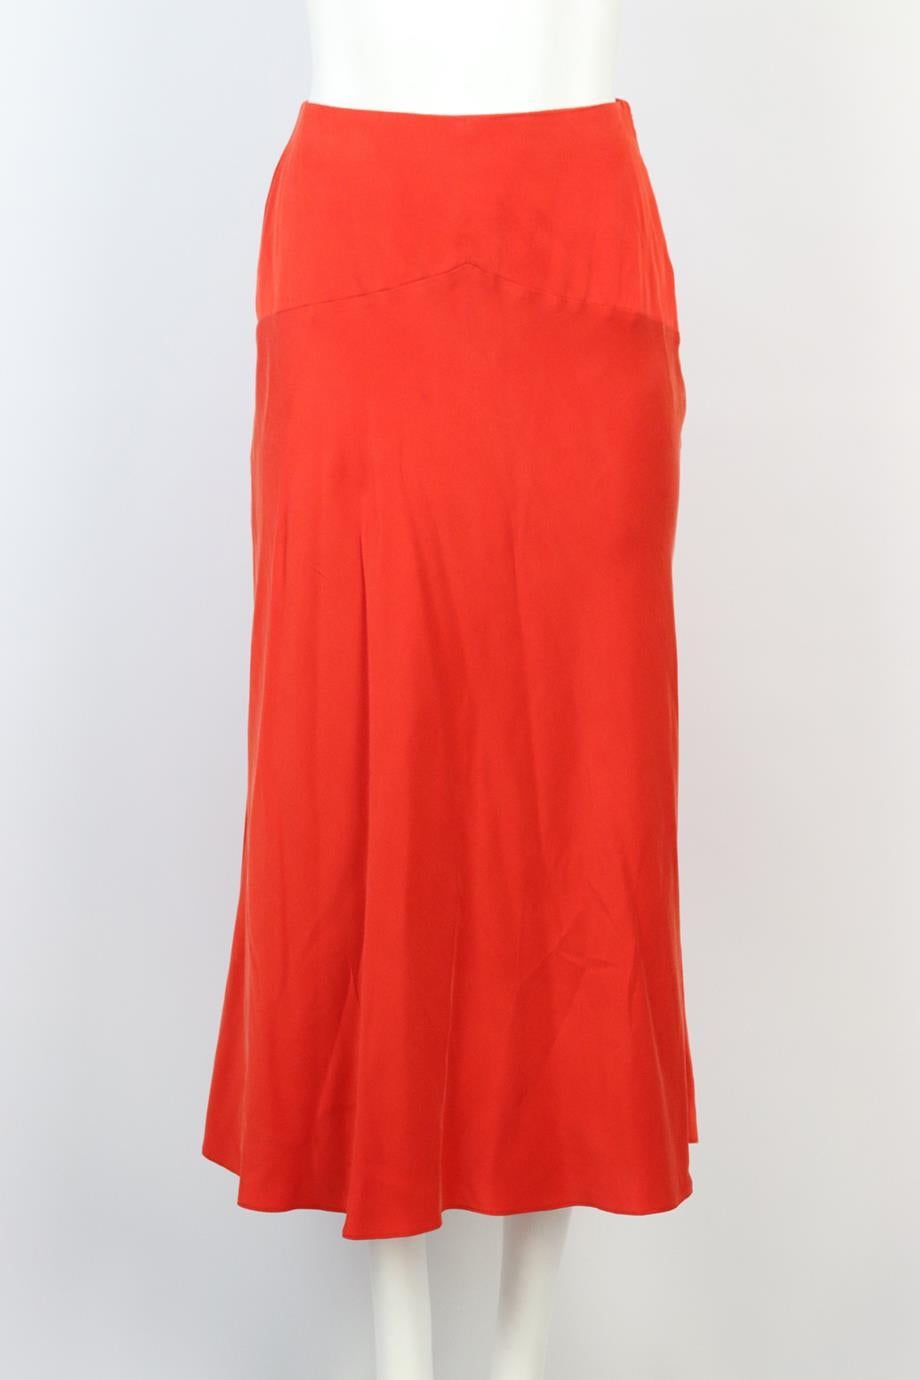 TOVE silk midi skirt. Orange. Zip fastening at side. 100% Silk; lining: 100% viscose. Size: US 4 (UK 8, FR 36, IT 40). Waist: 26 in. Hips: 44 in. Length: 34 in.. Very good condition - Light marks on front; see pictures.